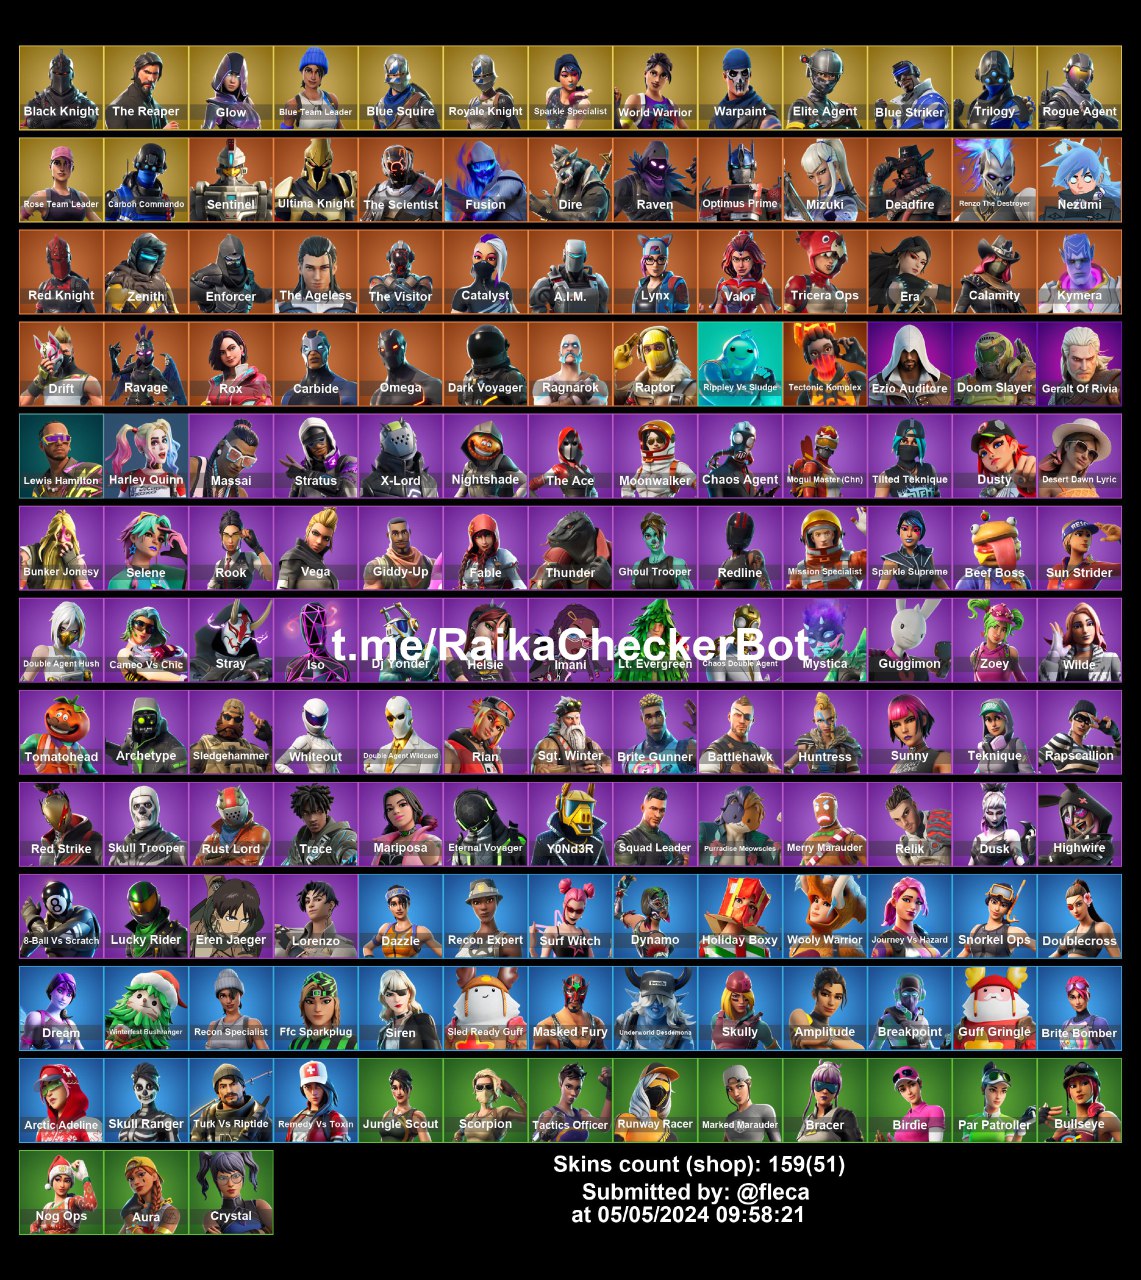 [PC/PSN/NINTENDO] 159 SKINS | OG STW | BLACK KNIGHT | THE REAPER | GLOW | MERRY MINTY AXE | SPARKLE SPECIALIST | ROYALE KNIGHT | 210 VB